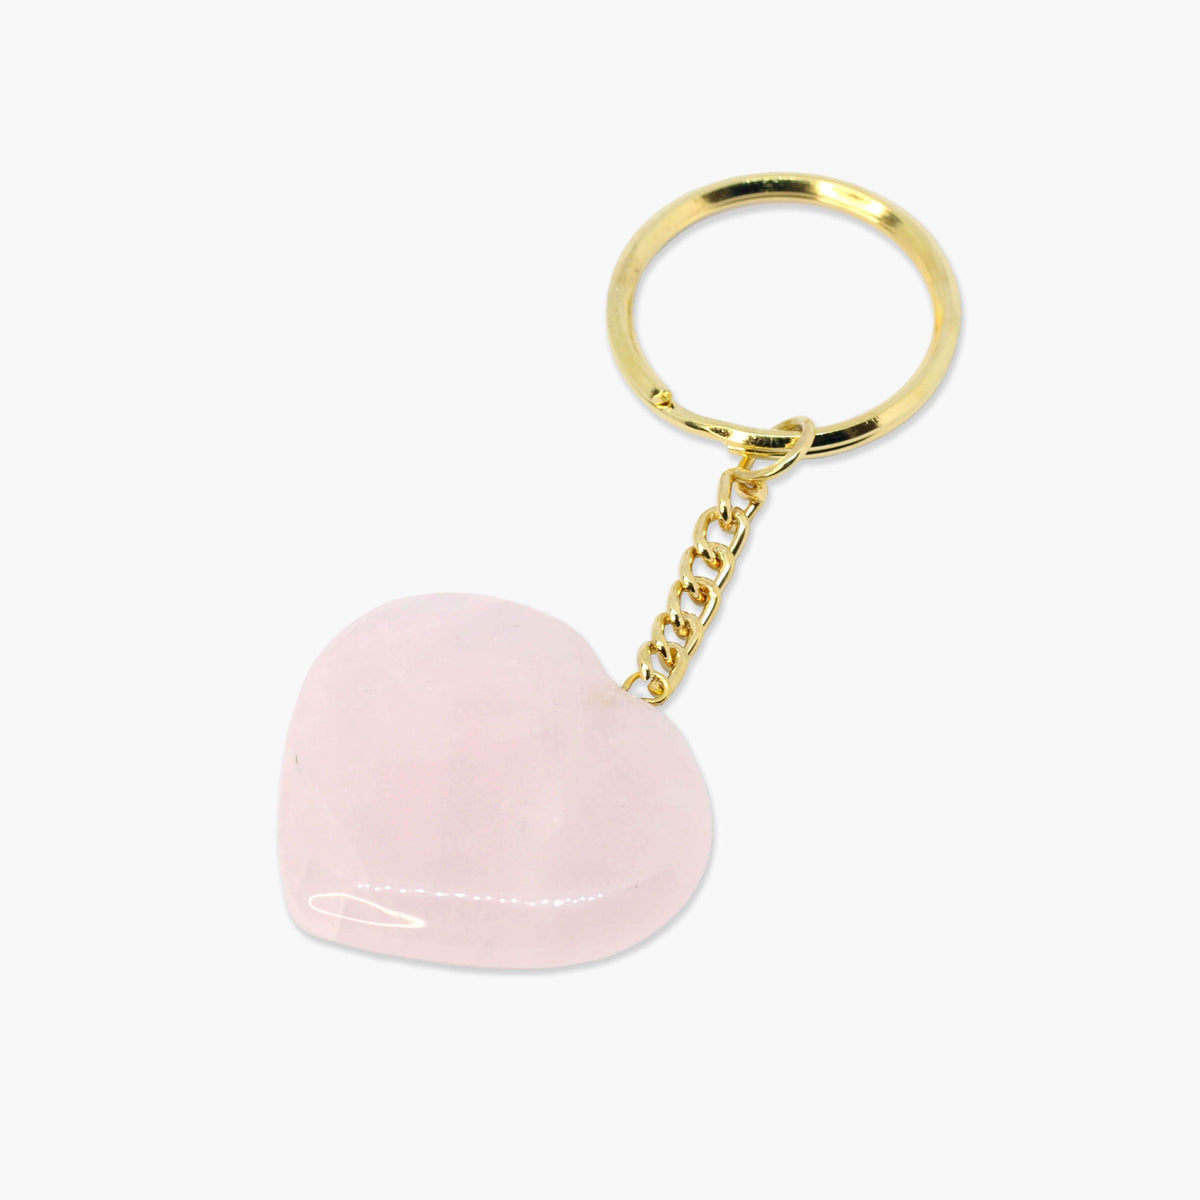 Crystal Heart Keychains Dainty Accessories Natural Stone | Heart-Shaped | Worry Stone Crystal Keychains